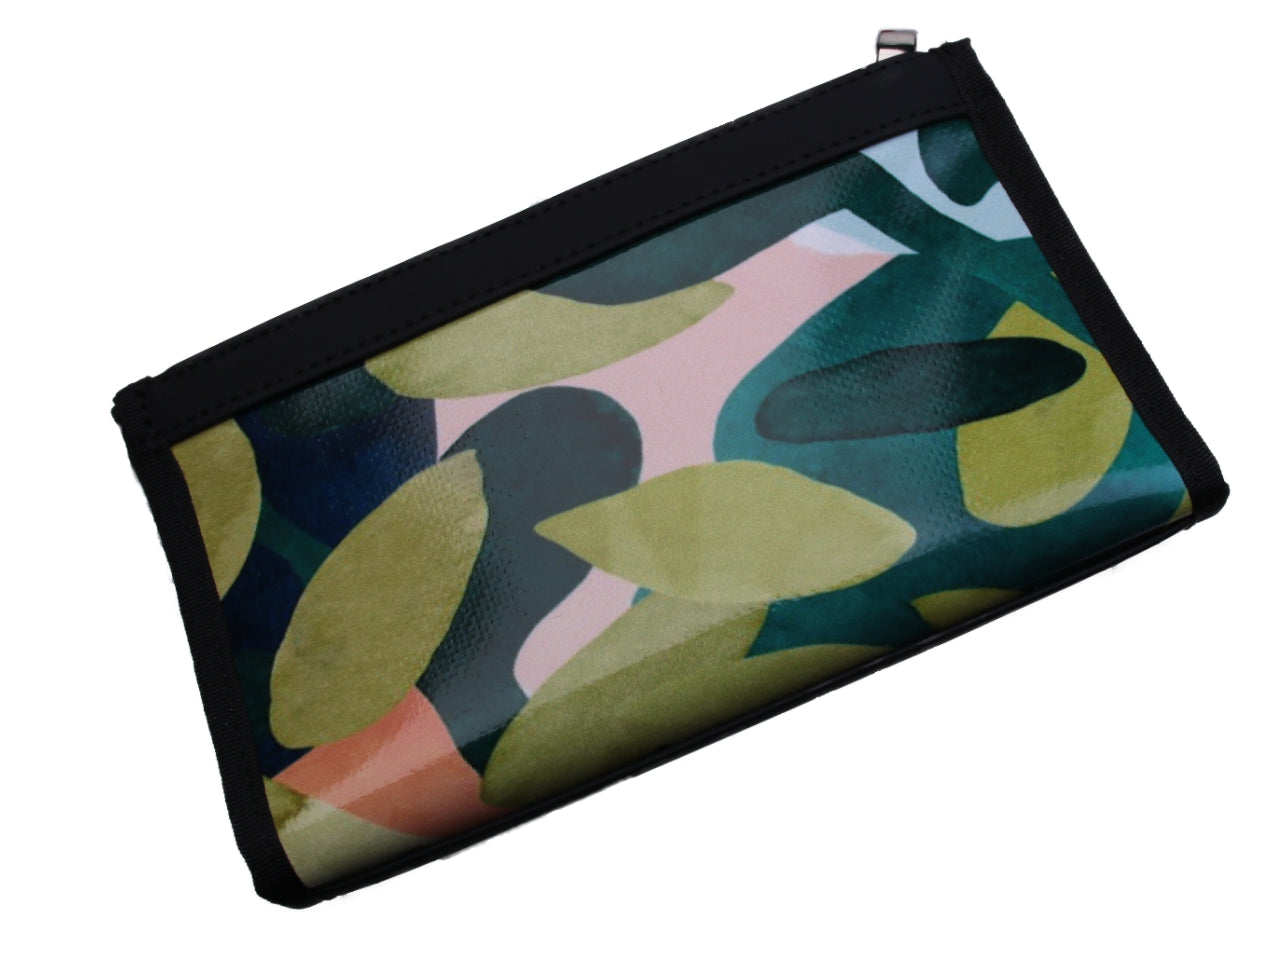 LARGE WOMEN'S WALLET "LEAVES". MODEL PIT MADE OF LORRY TARPAULIN. - Limited Edition Paul Meccanico